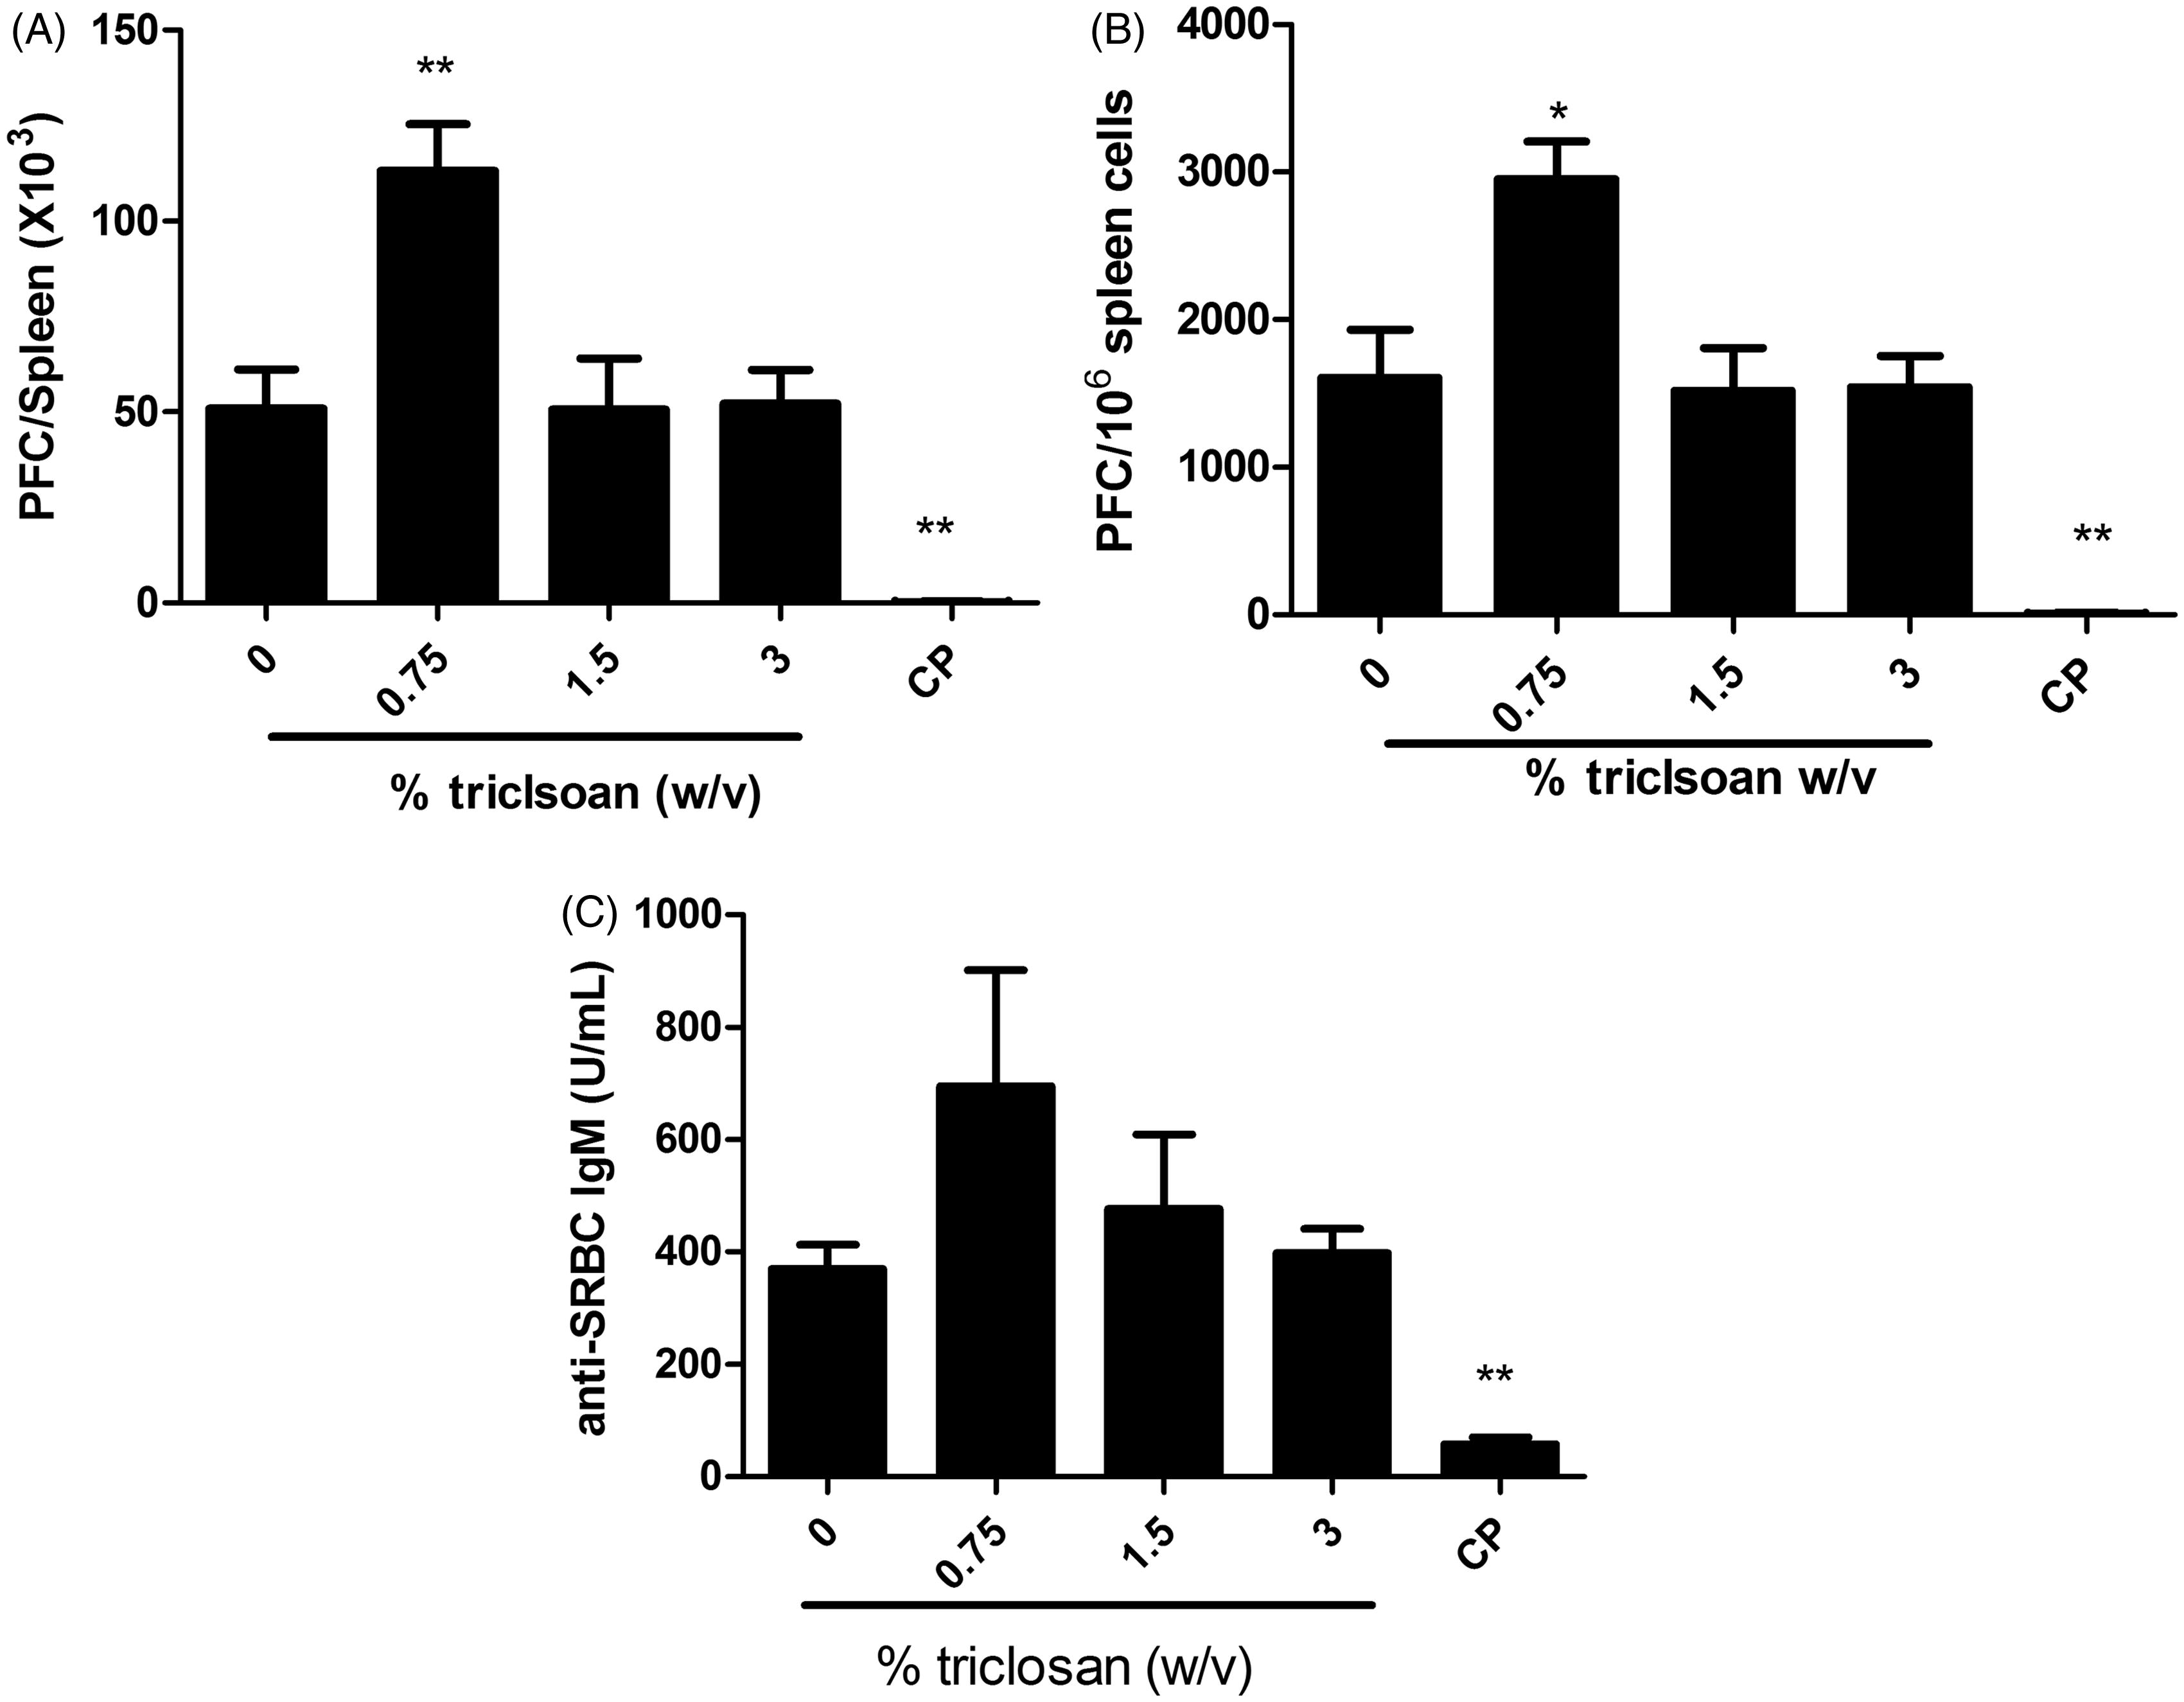 Figure 6. Triclosan does not suppress the spleen IgM response to SRBC. Analysis of antibody producing cells after a 28-day dermal exposure to triclosan on the (A) total and (B) specific activity IgM response to SRBC in the spleen and serum. (C) Bars represent mean fold-change (±SE) of six mice/group. Cyclophosphamide (CP) was included as the positive control. Levels of statistical significance are denoted *p < 0.05 and **p < 0.01 as compared to acetone vehicle.